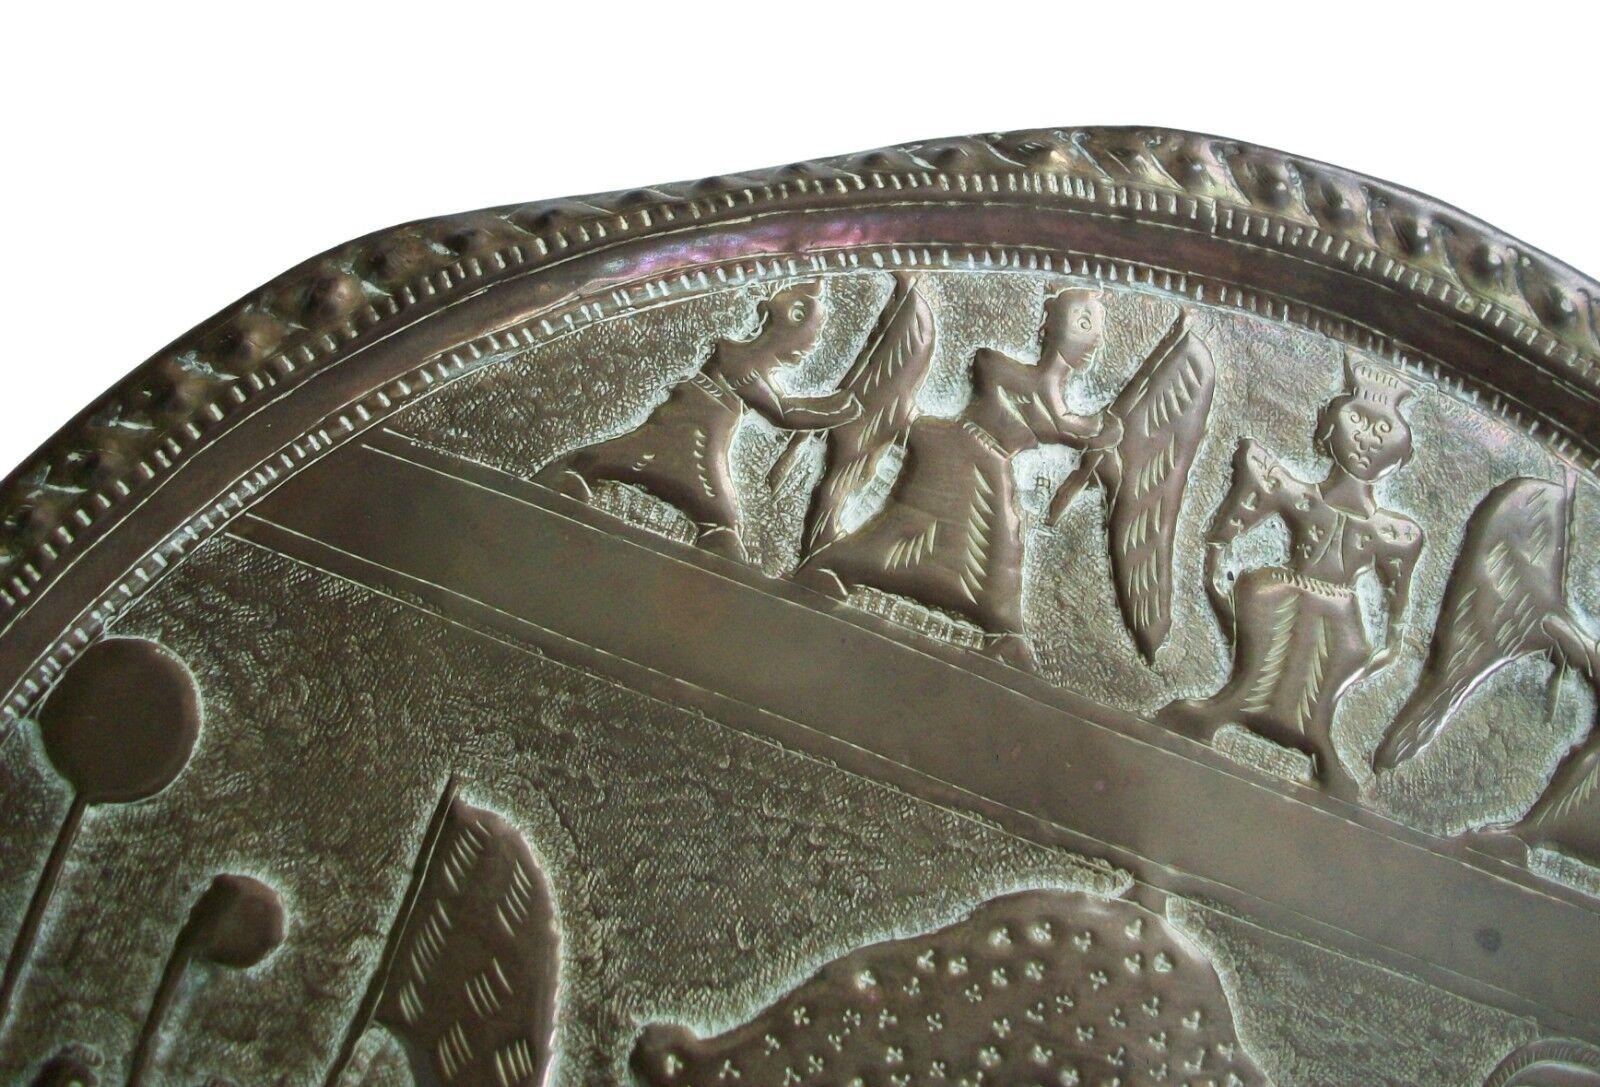 Hand-Crafted Vintage South Asian Brass Plate - Hand Hammered - #4 - India - Mid 20th Century For Sale